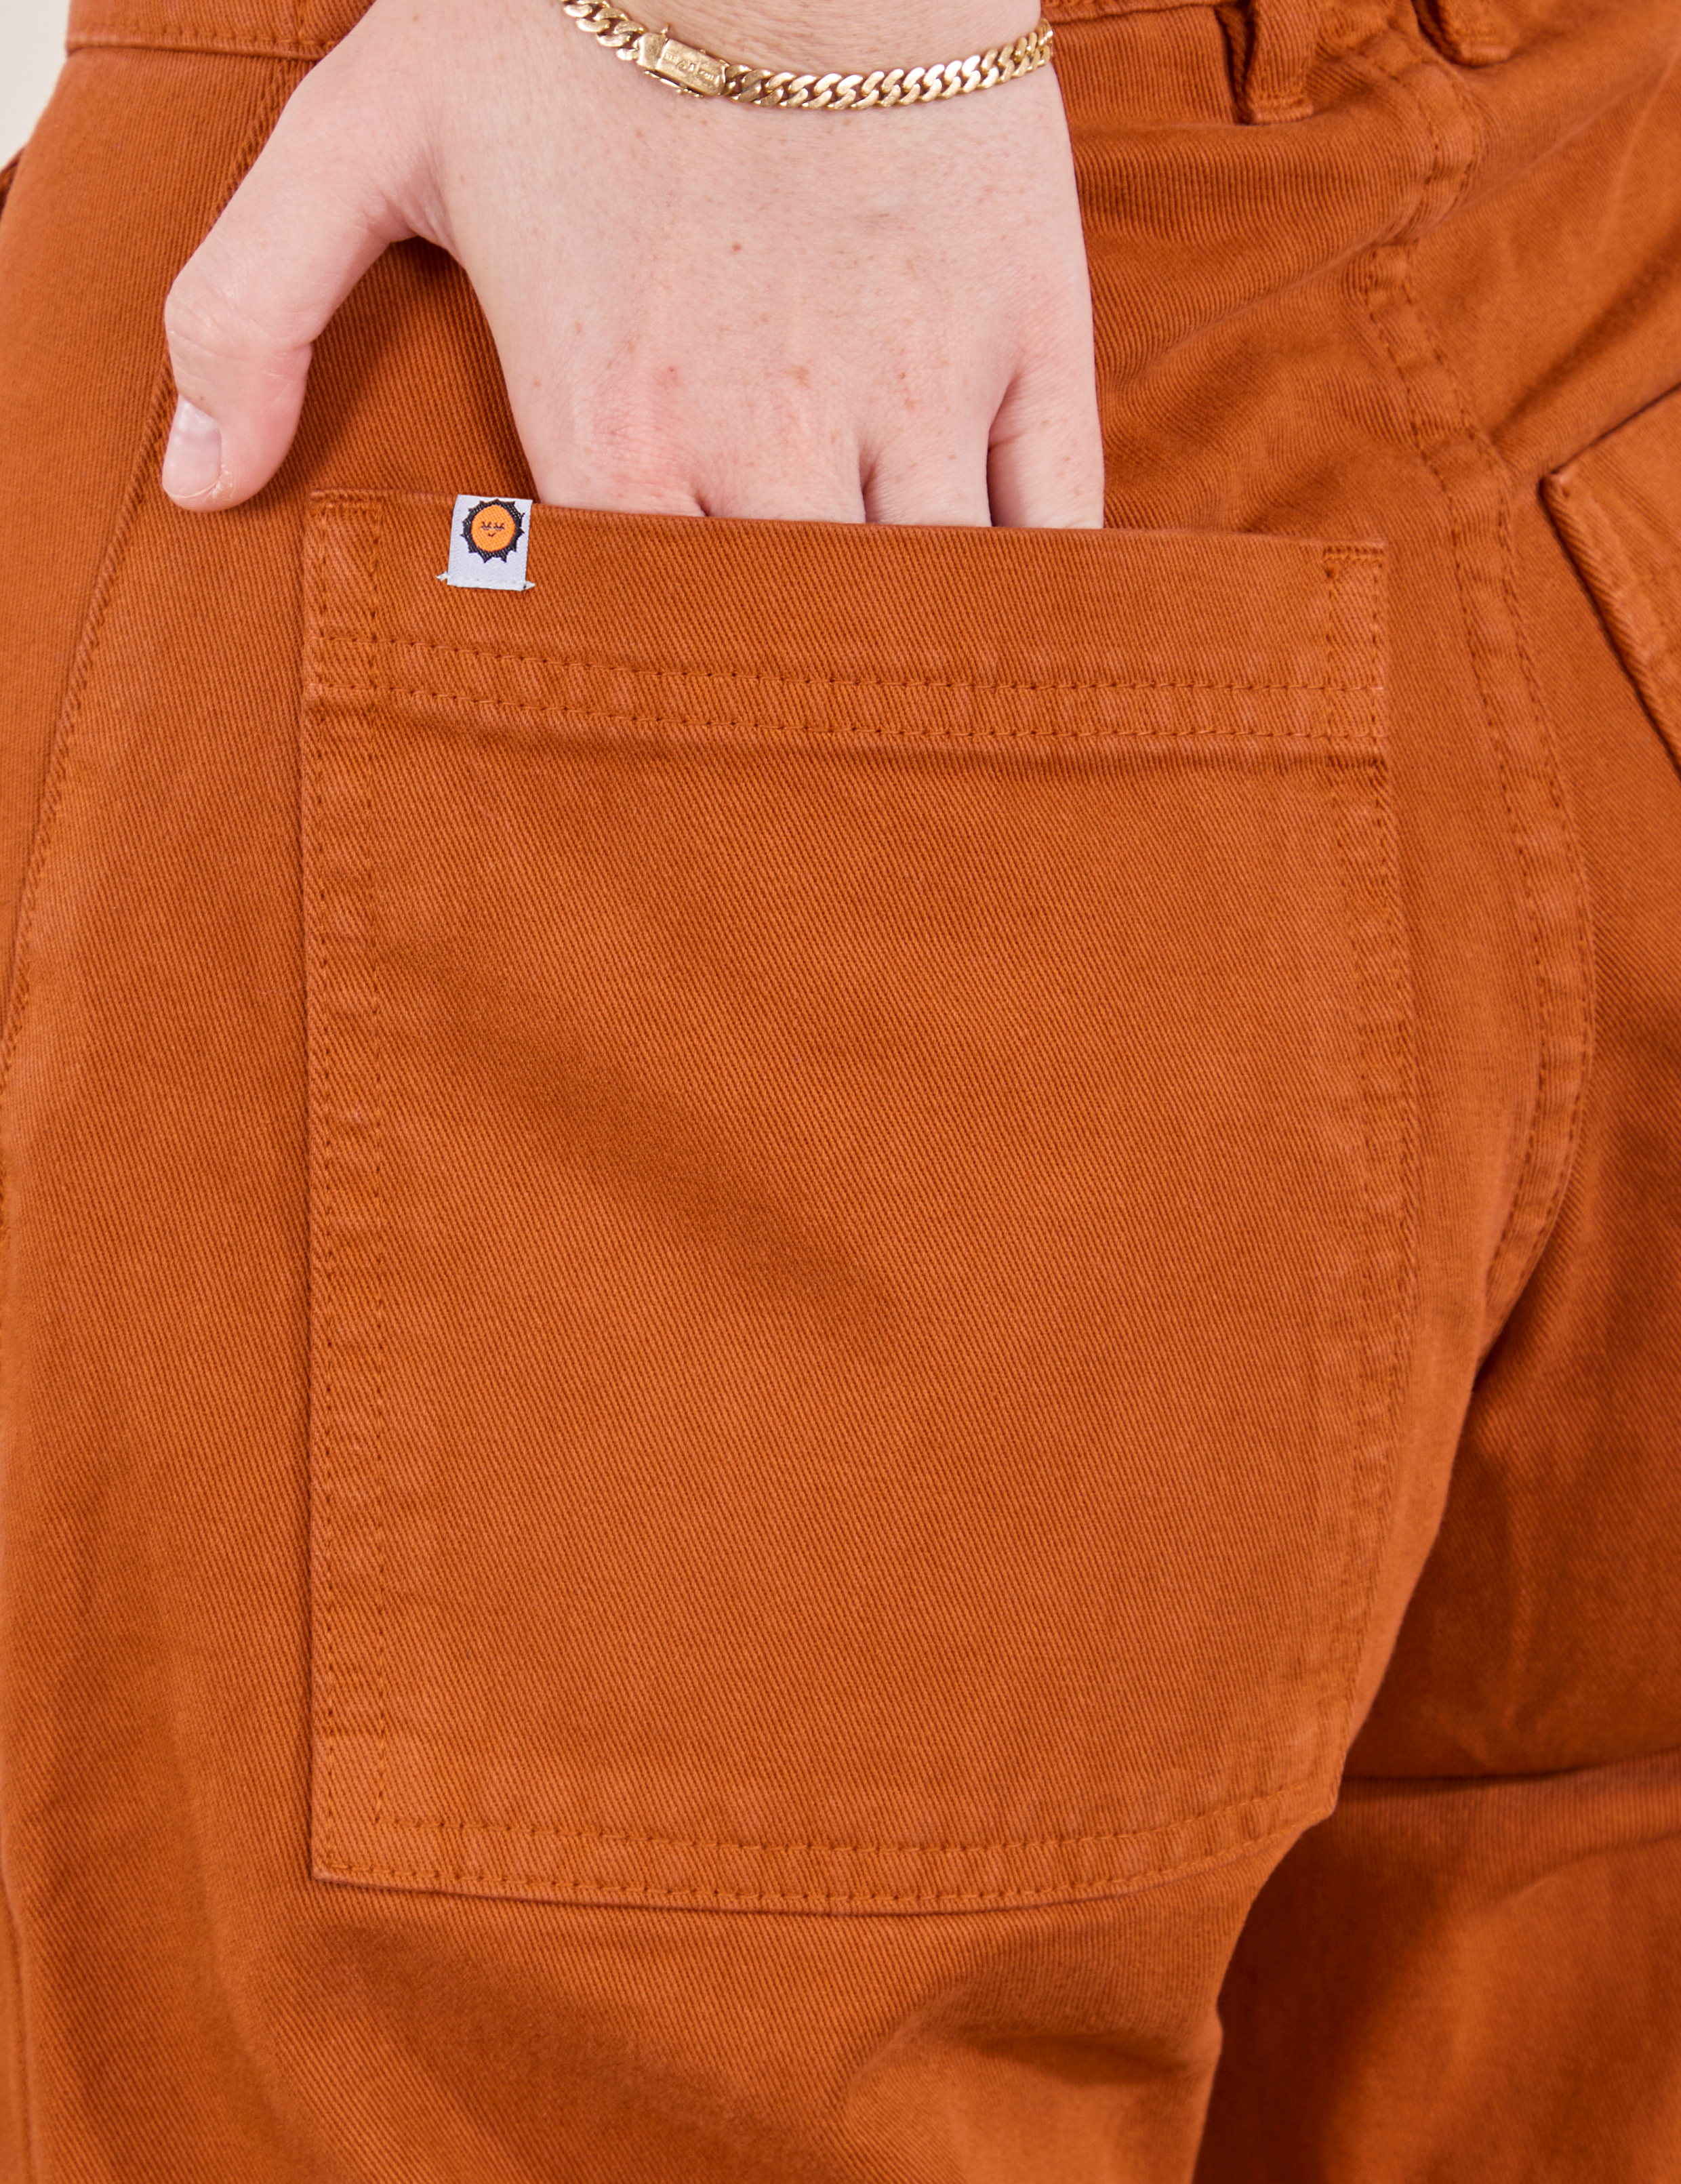 Petite Pencil Pants in Burnt Terracotta back pocket close up. Hana has her hand in the pocket.